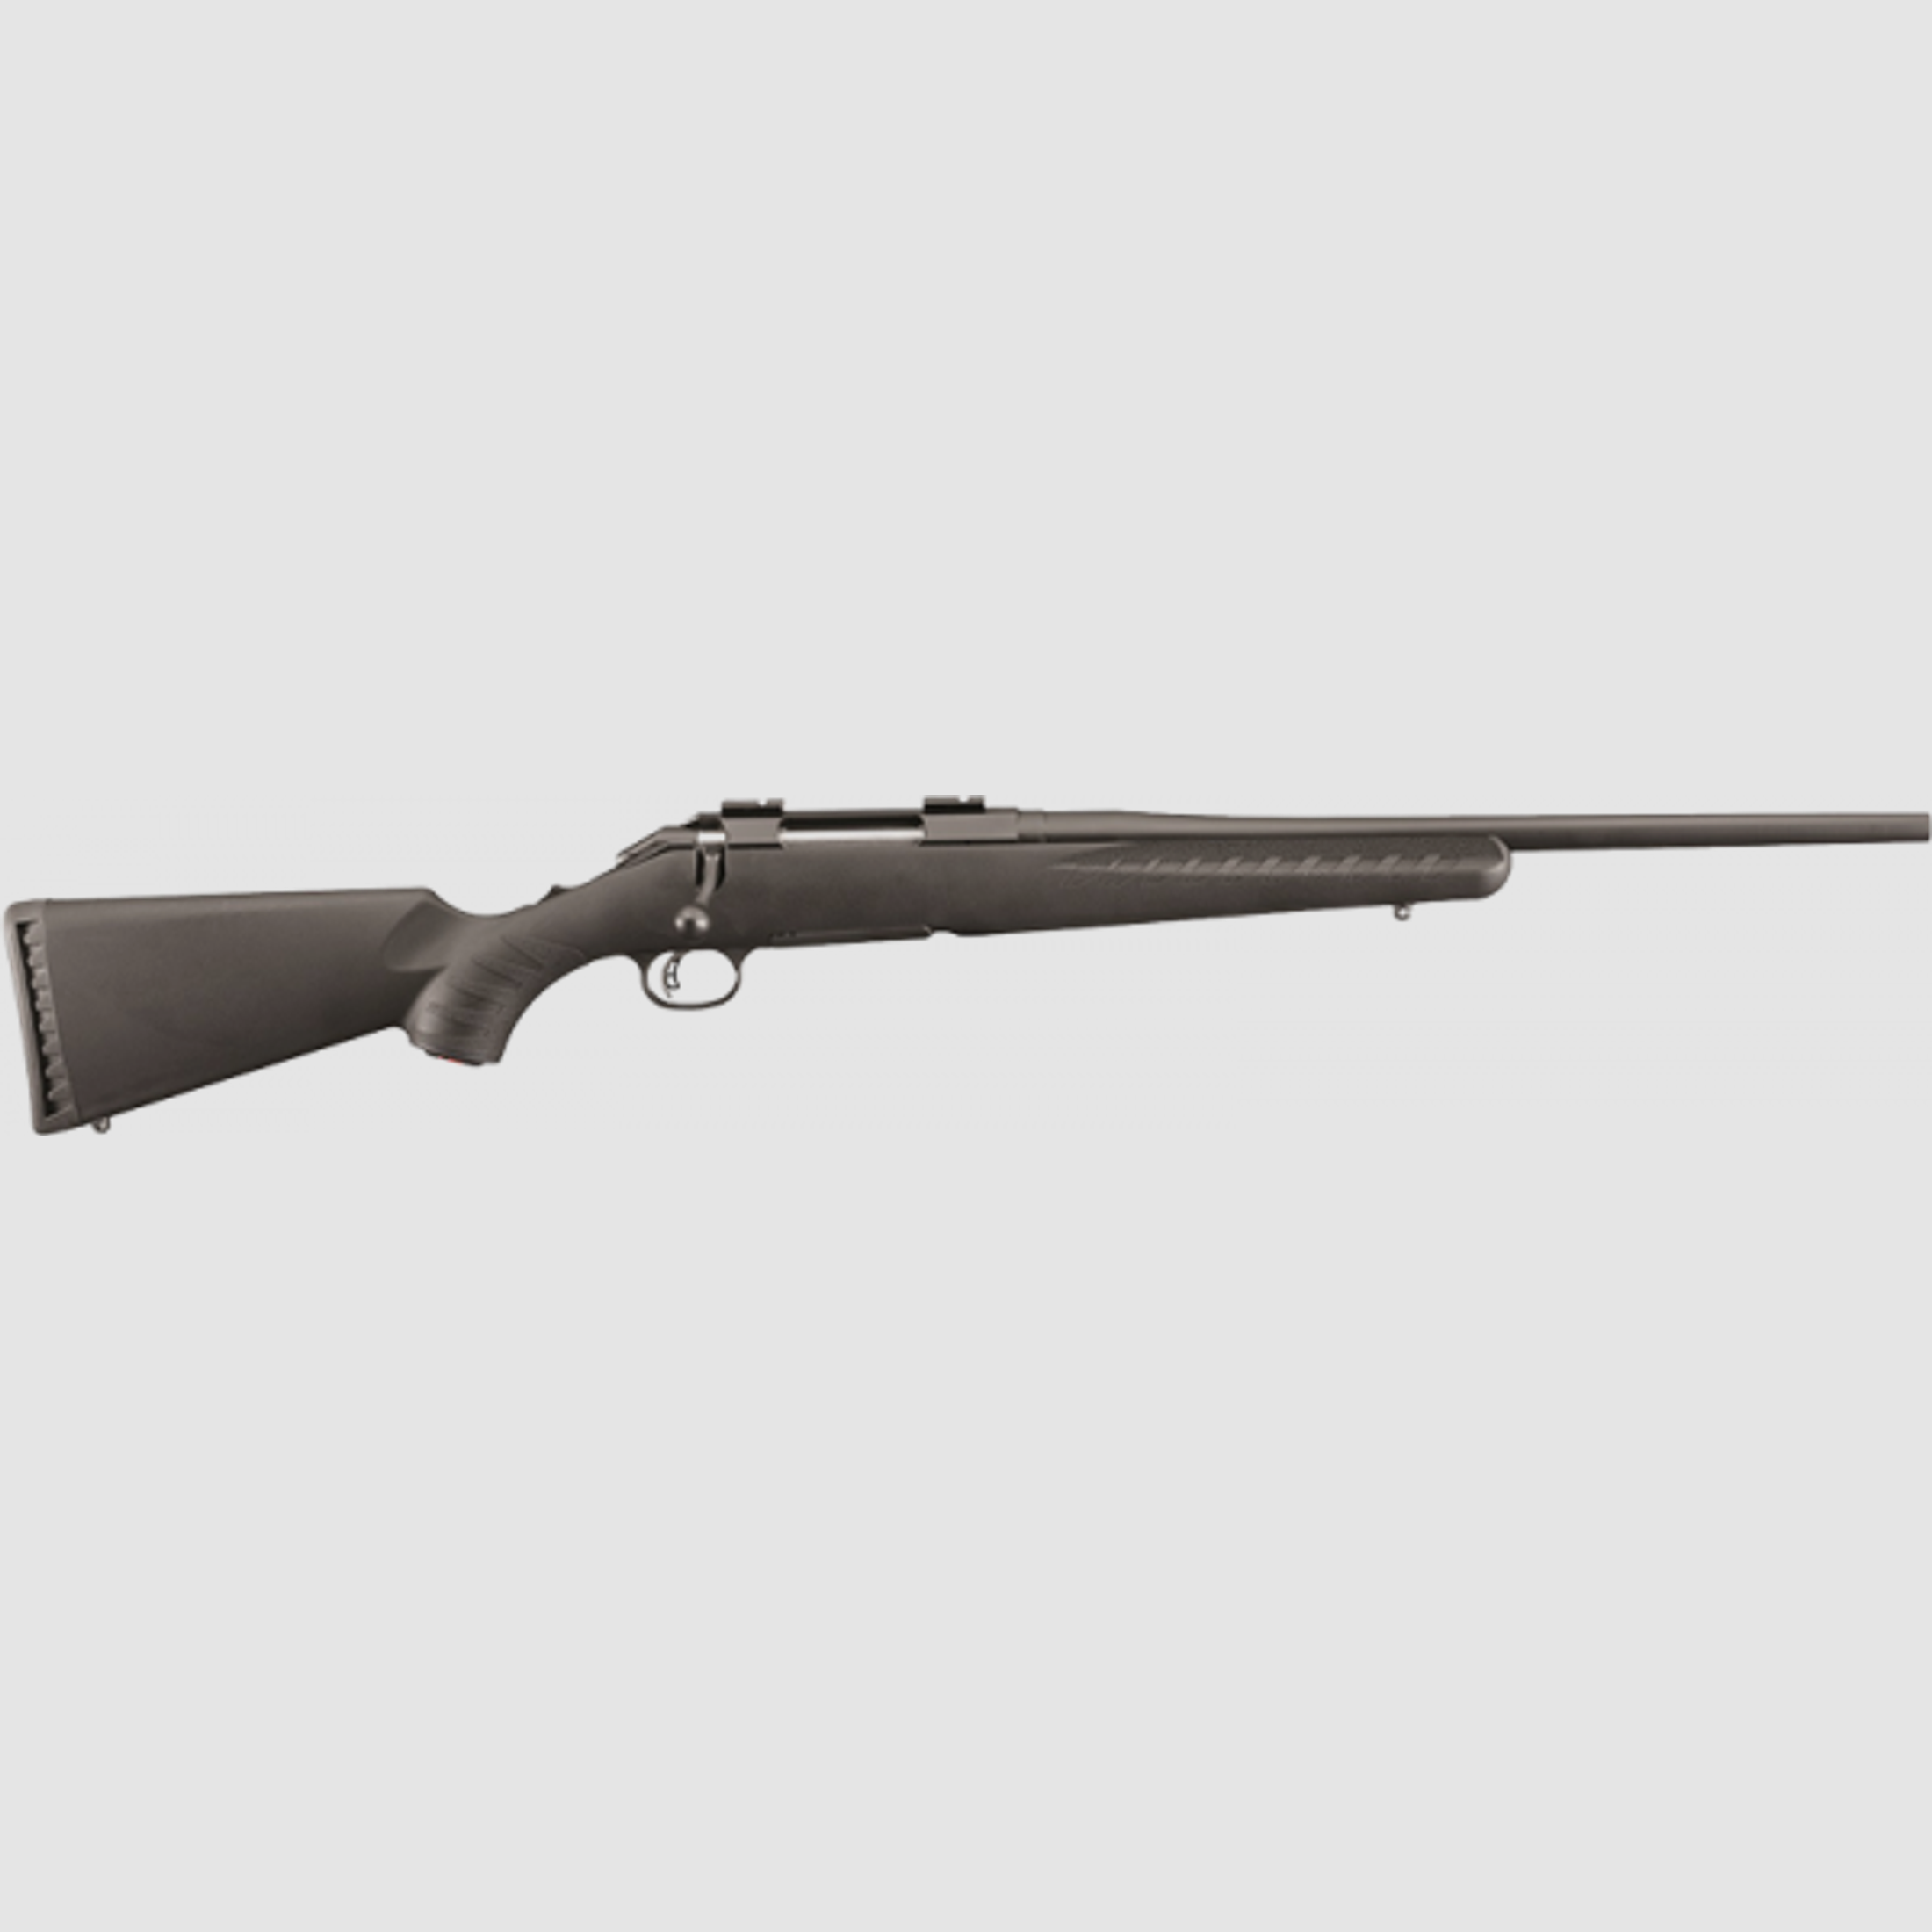 Ruger American Rifle Compact Repetierbüchse